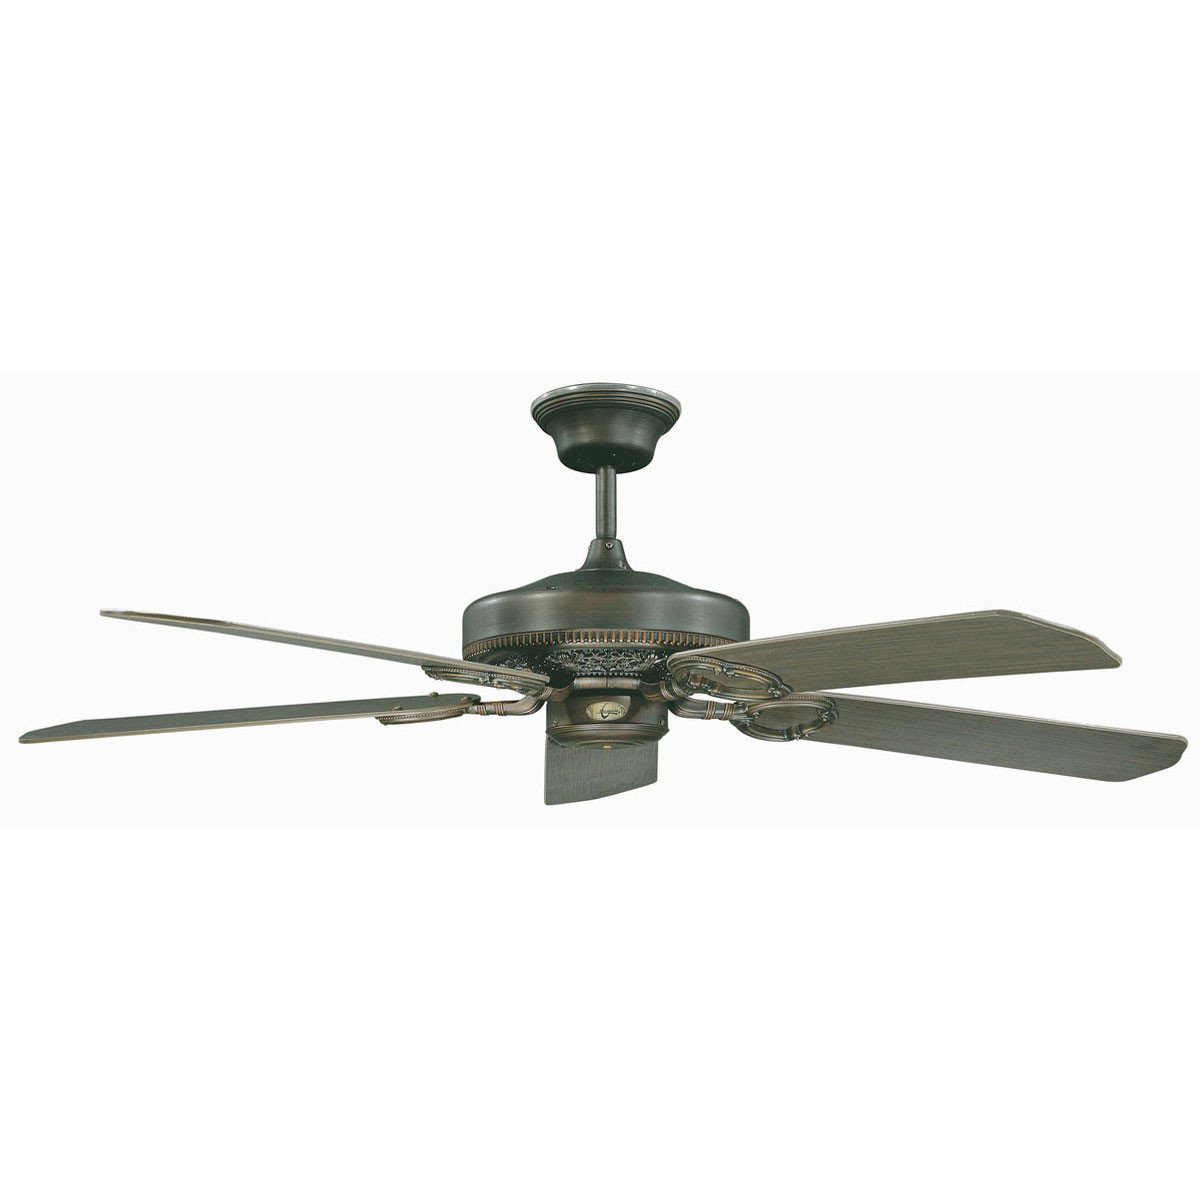 Concord Fans 52" French Quarter Traditional Oil Rubbed Bronze Ceiling Fan